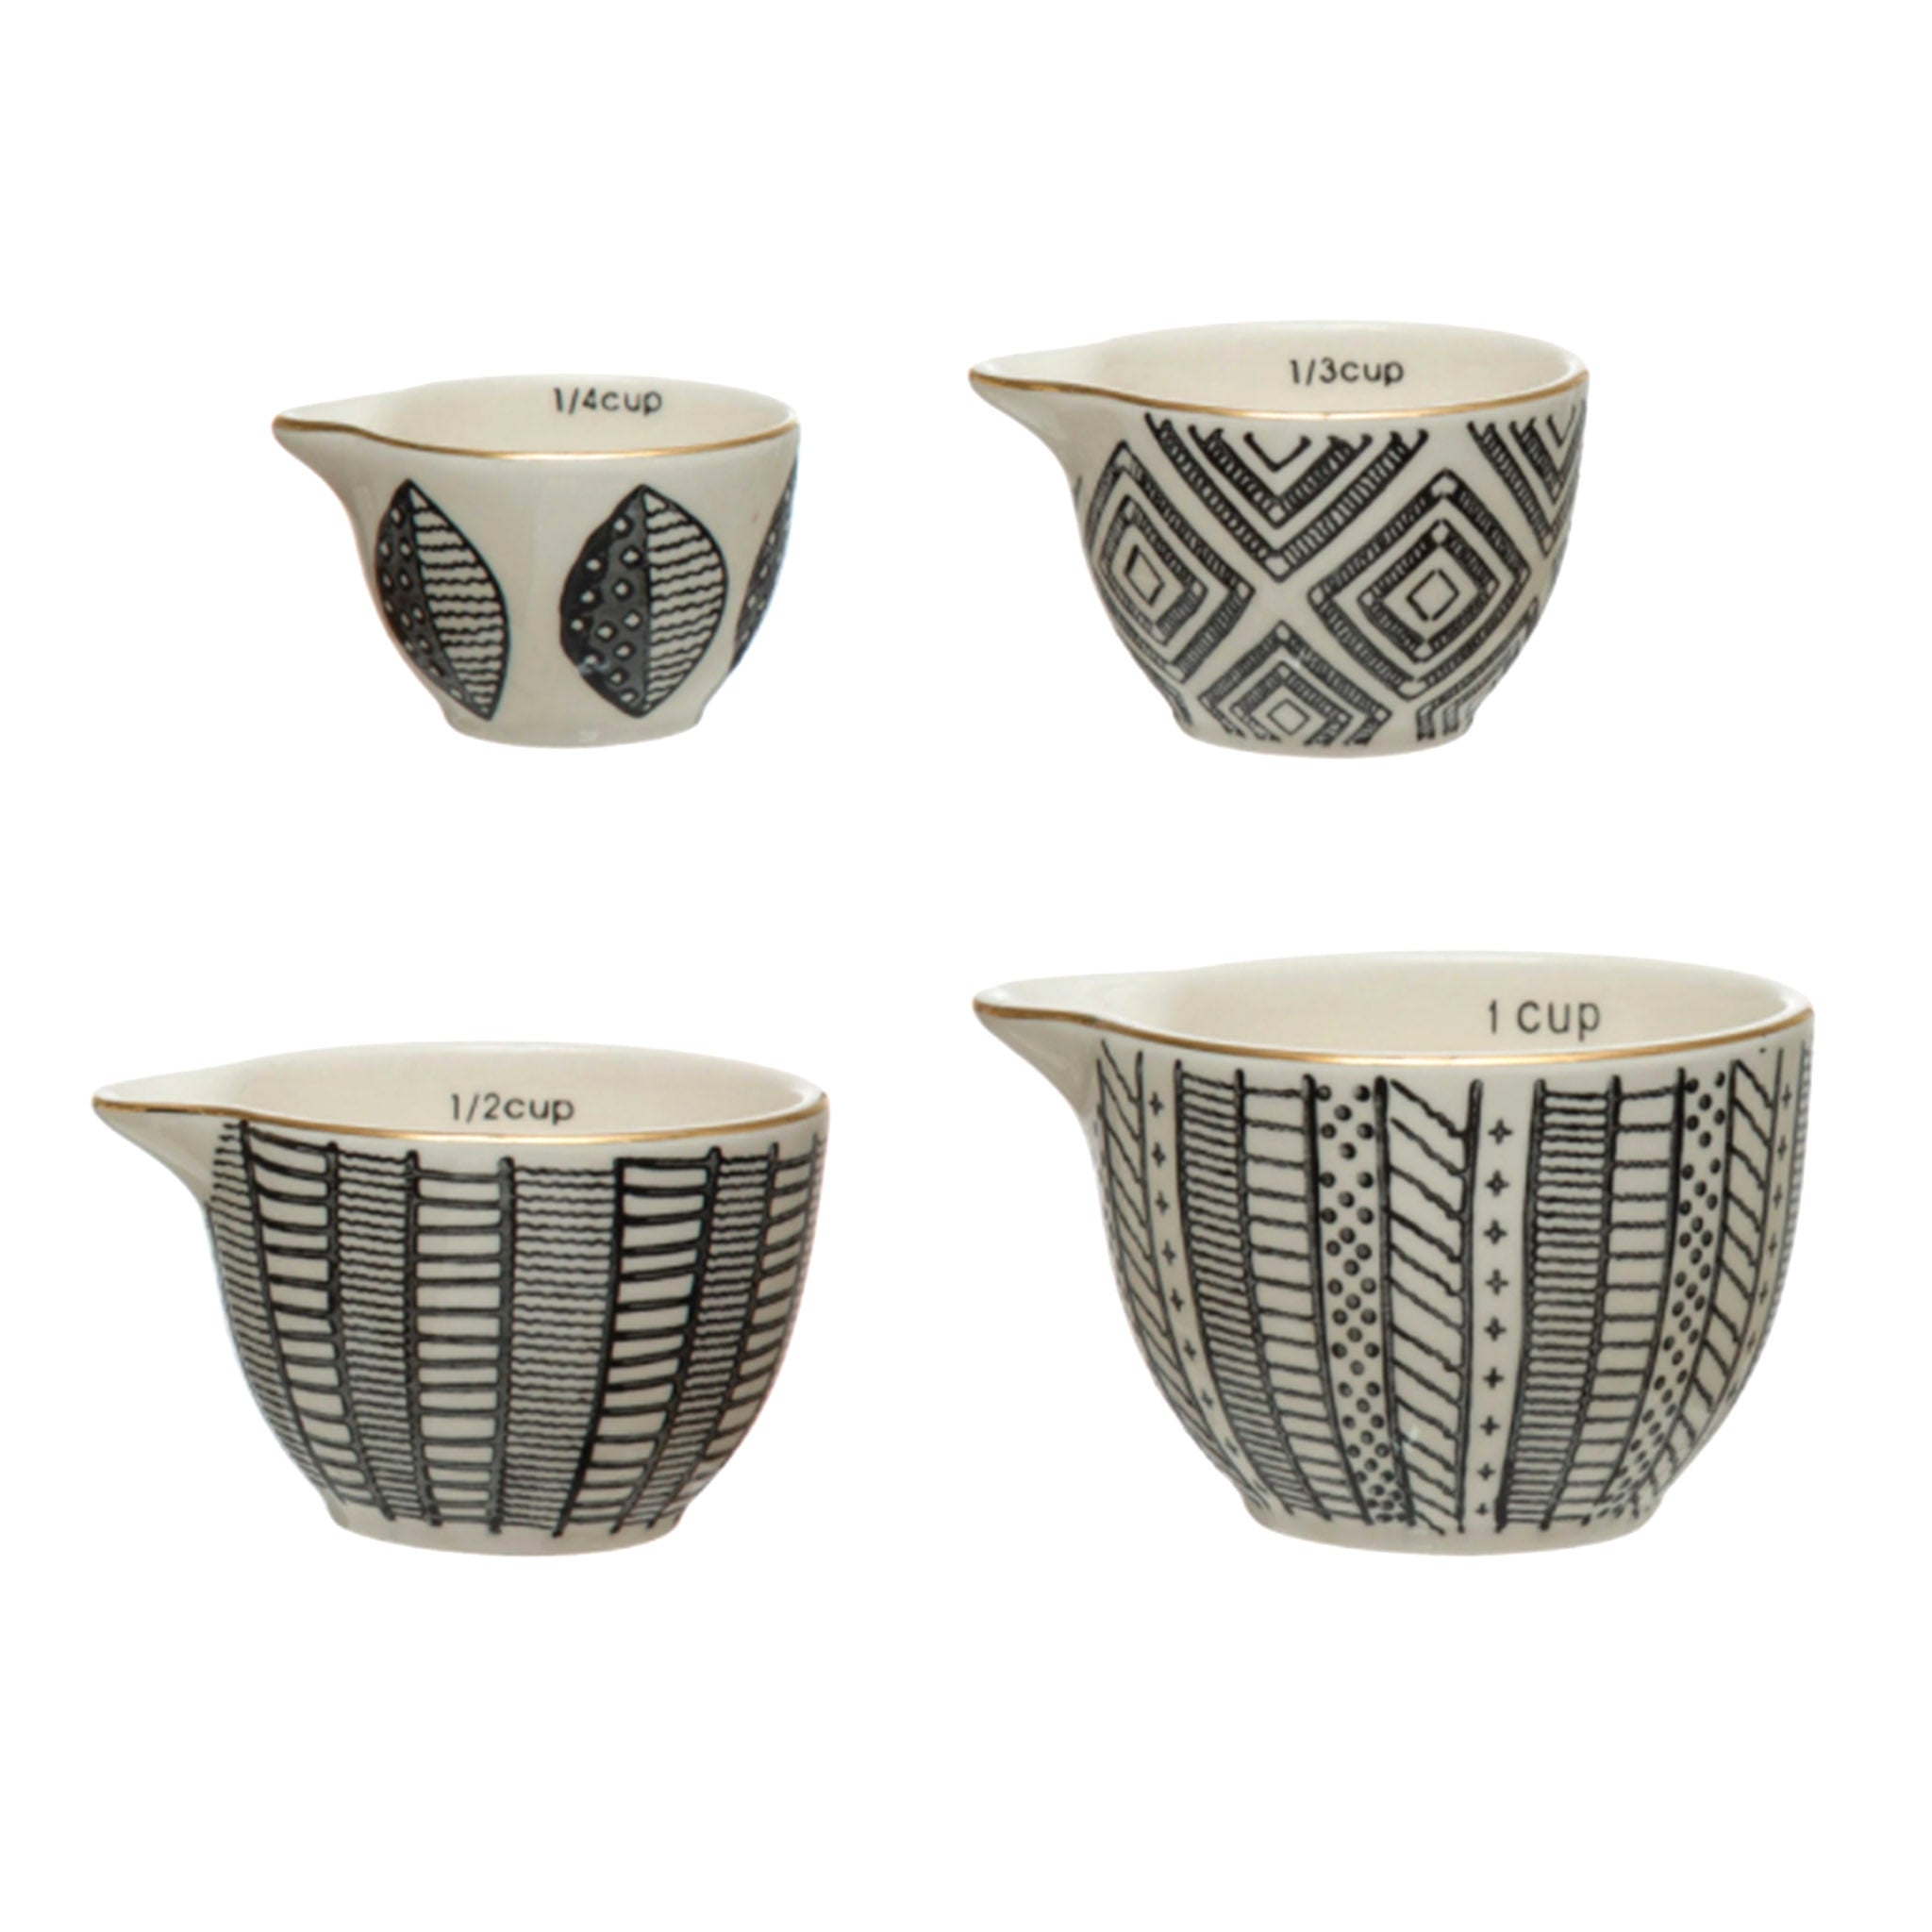 White Cottage Stoneware Co. Measuring Cups